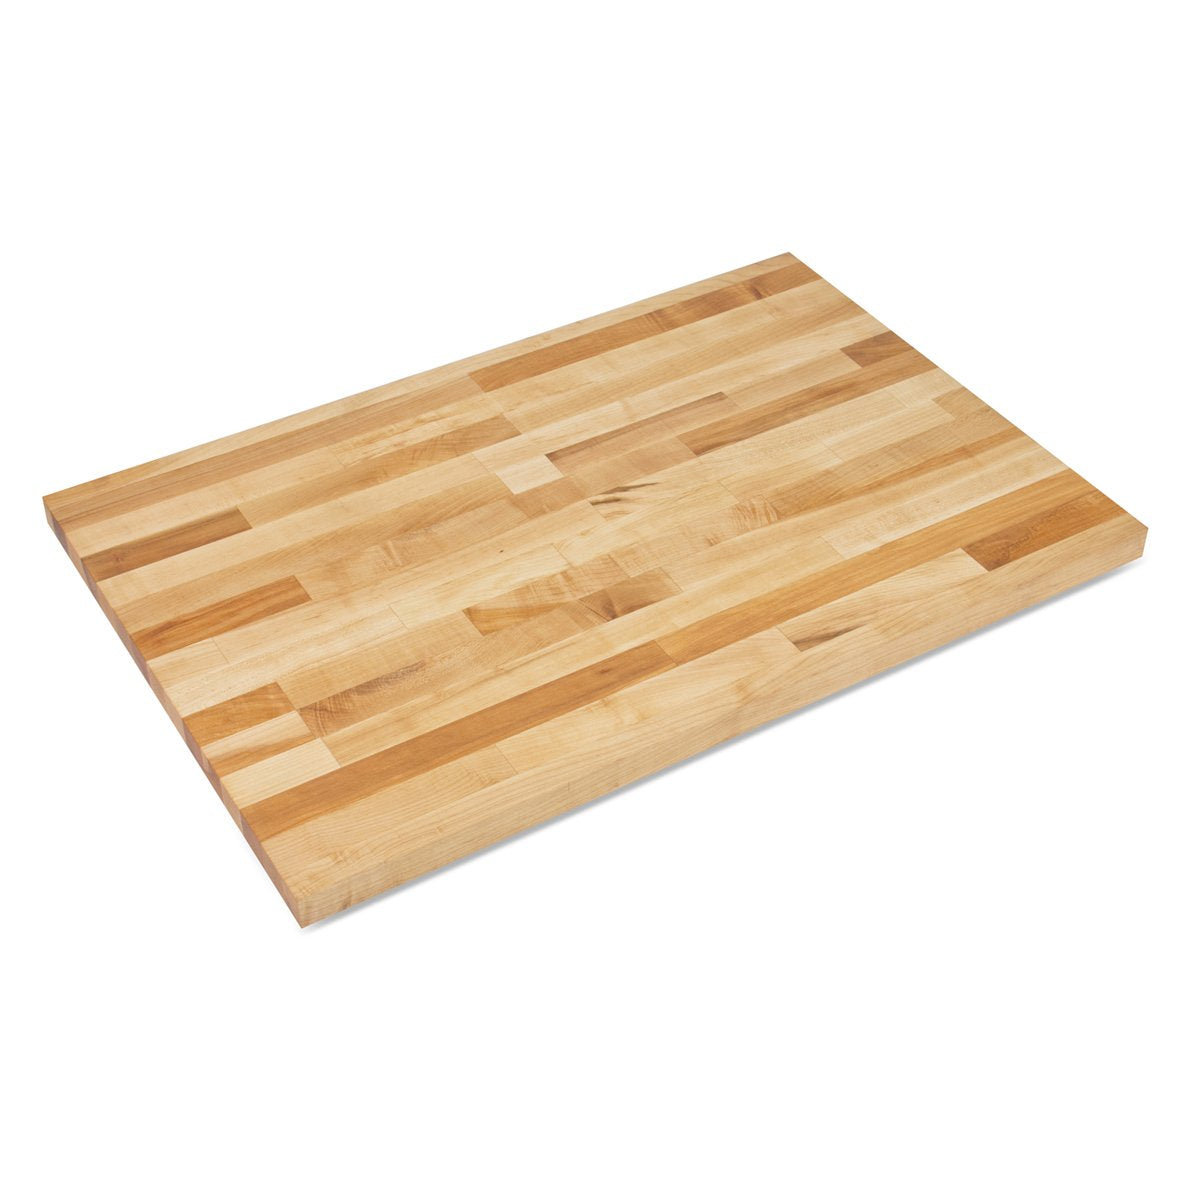 John Boos KCT-BL10927-O Blended Maple Butcher Block Countertop - 1-1/2" Thick, 109"L x 27"W, Natural Oil Finish